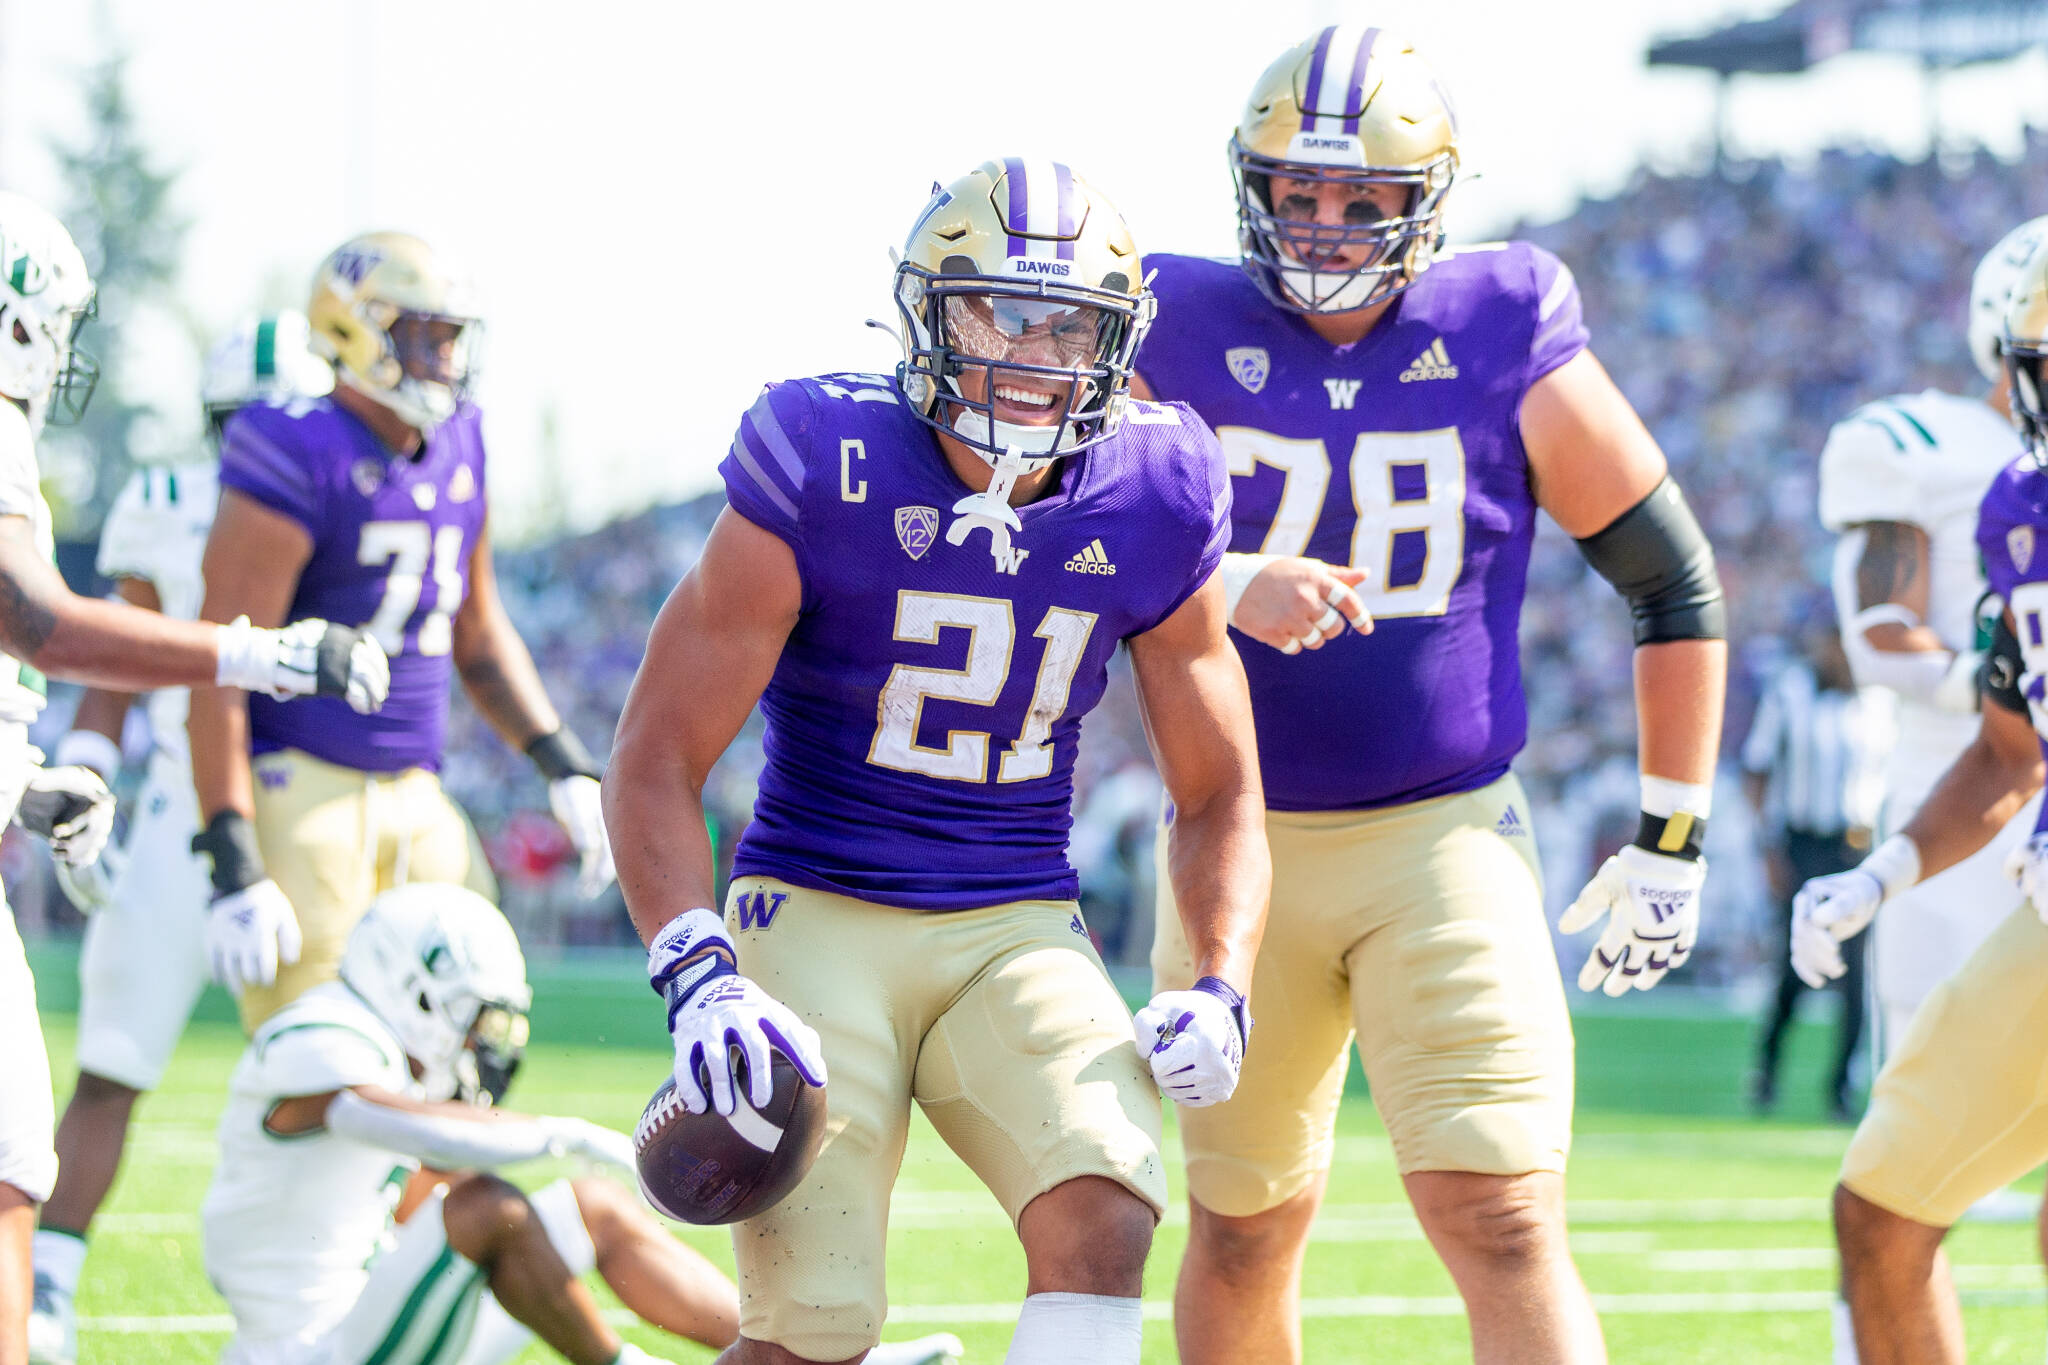 Washington running back Wayne Taulapapa (21) celebrates a touchdown during a game against Portland State on Saturday afternoon in Seattle. (Scott Eklund/Red Box Pictures)